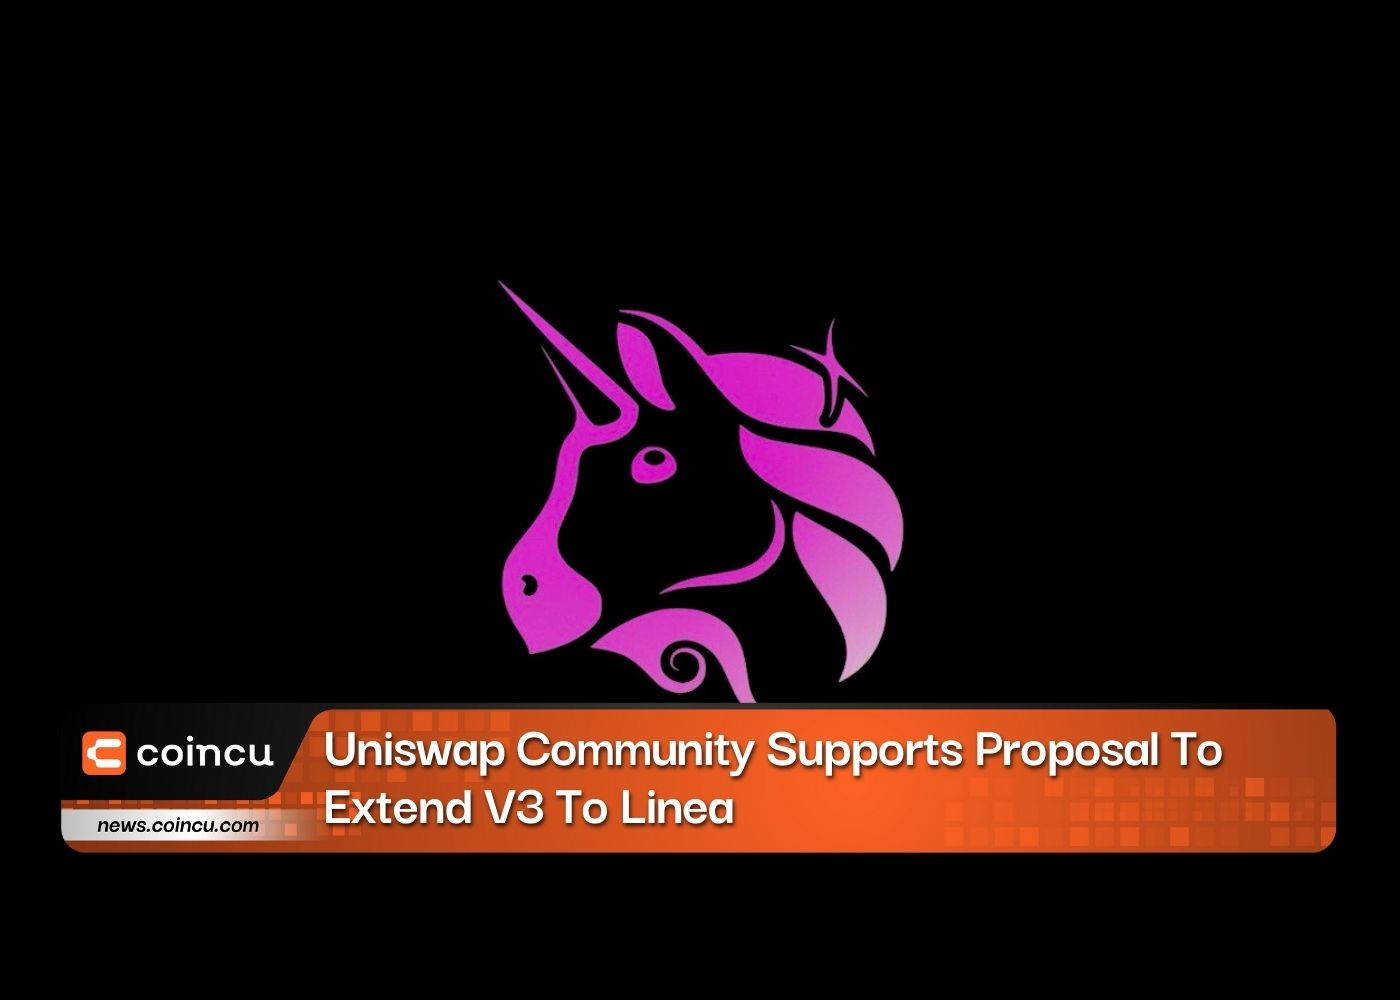 Uniswap Community Supports Proposal To Extend V3 To Linea